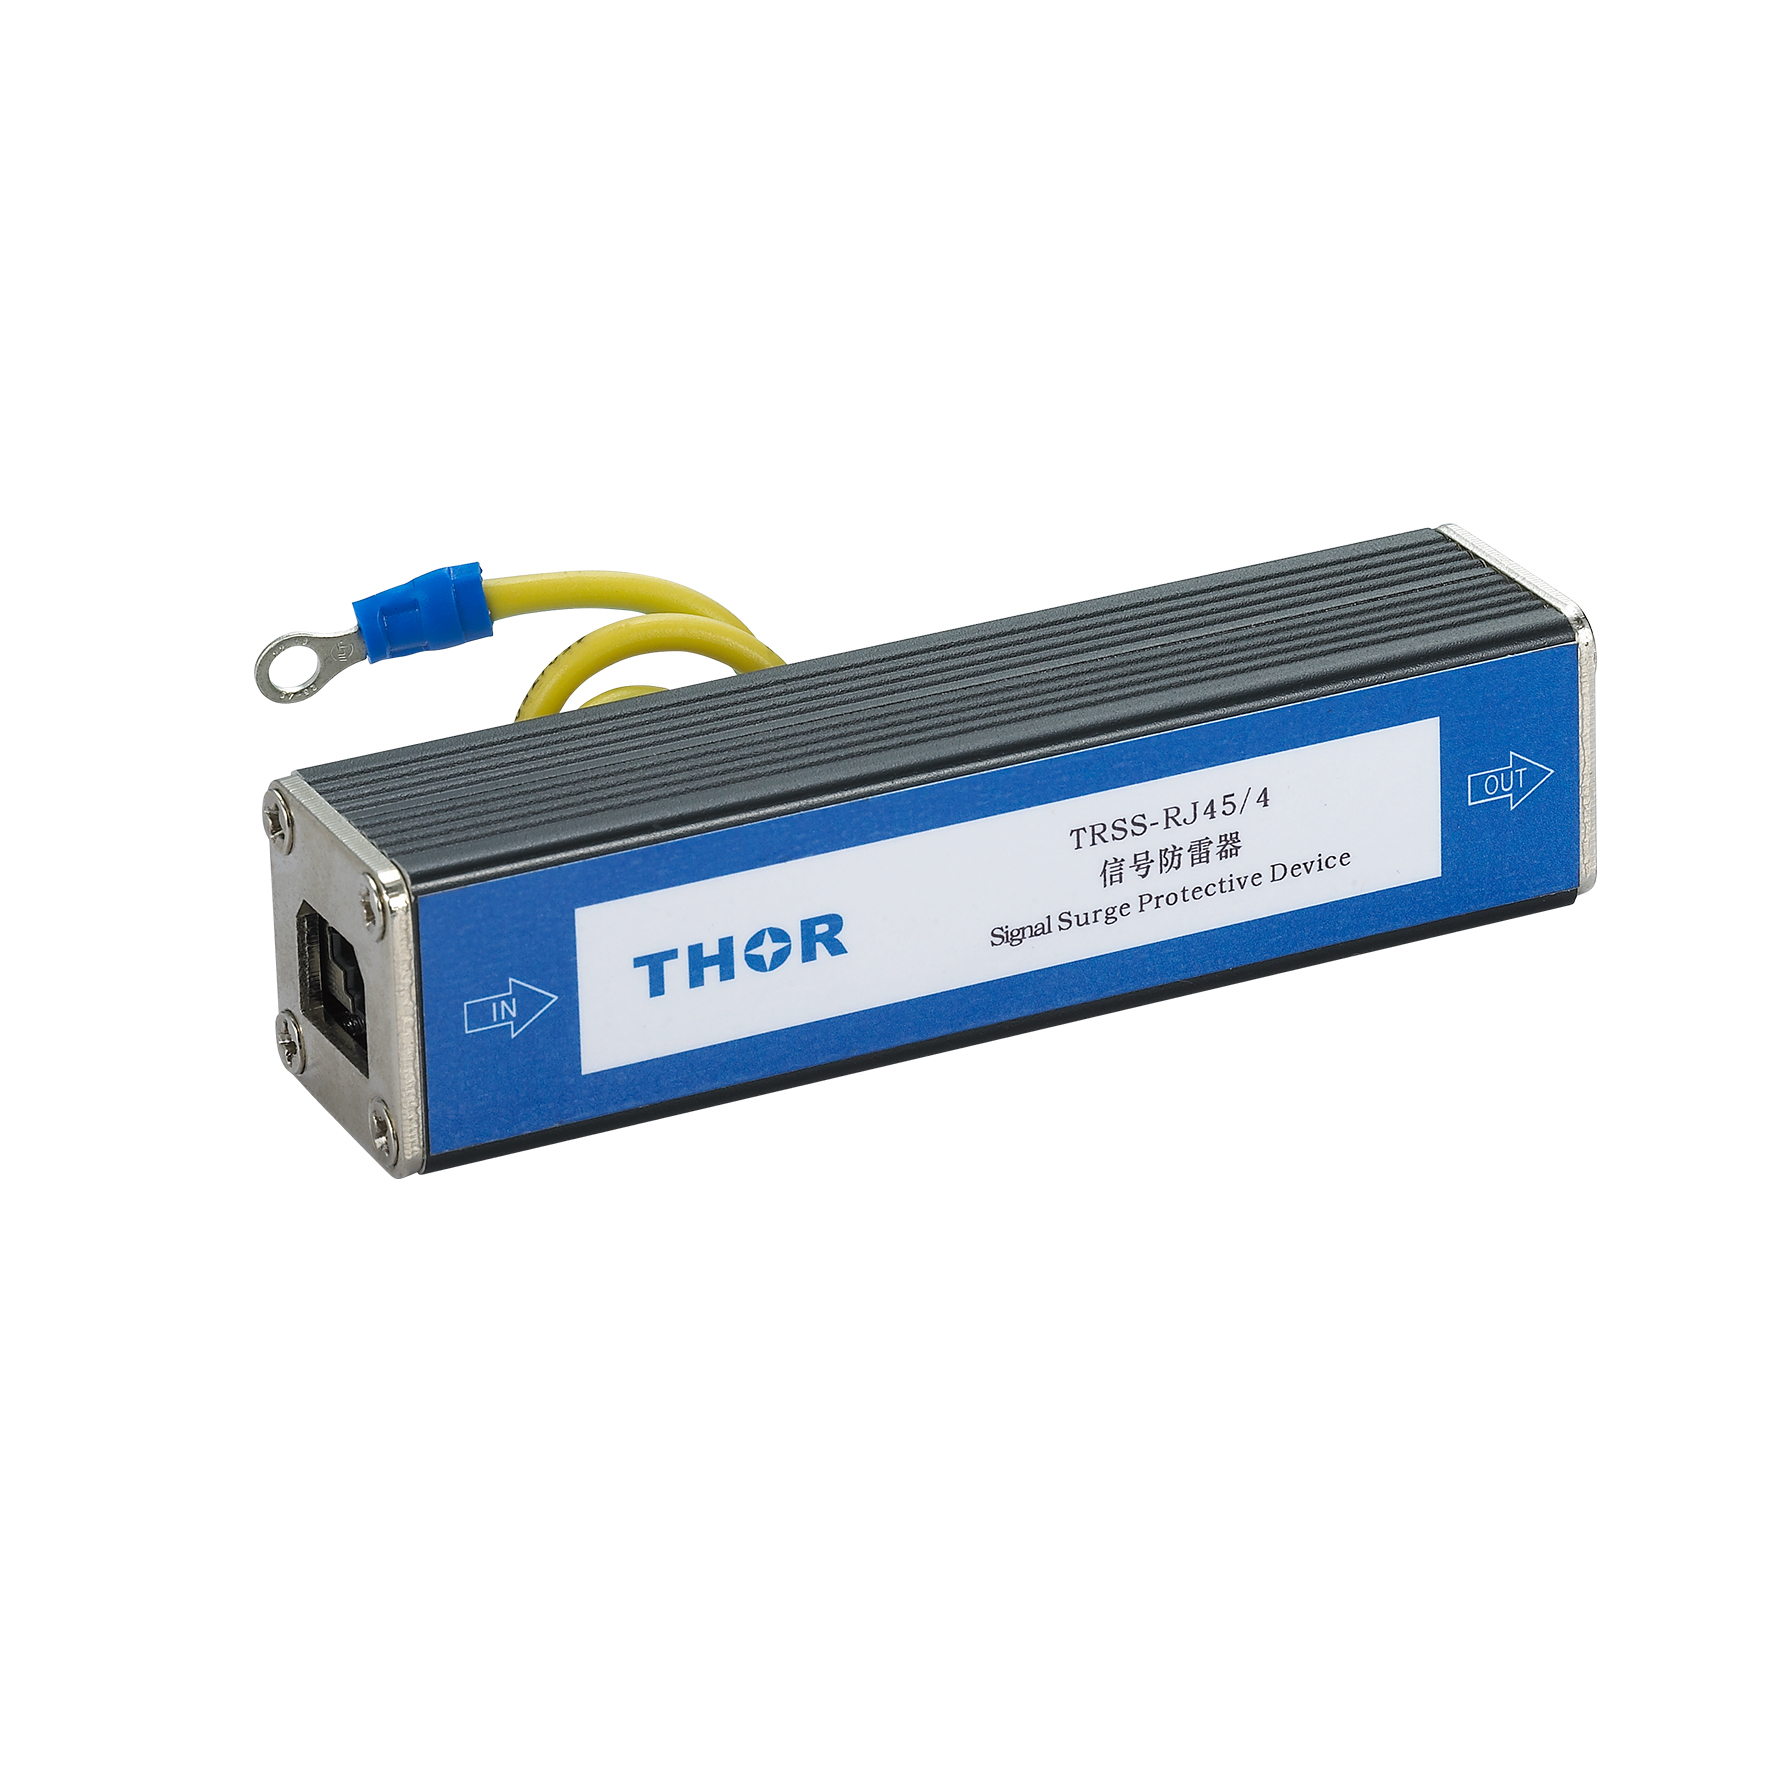 TRSS-RJ45/4 Network Signal Surge Protector